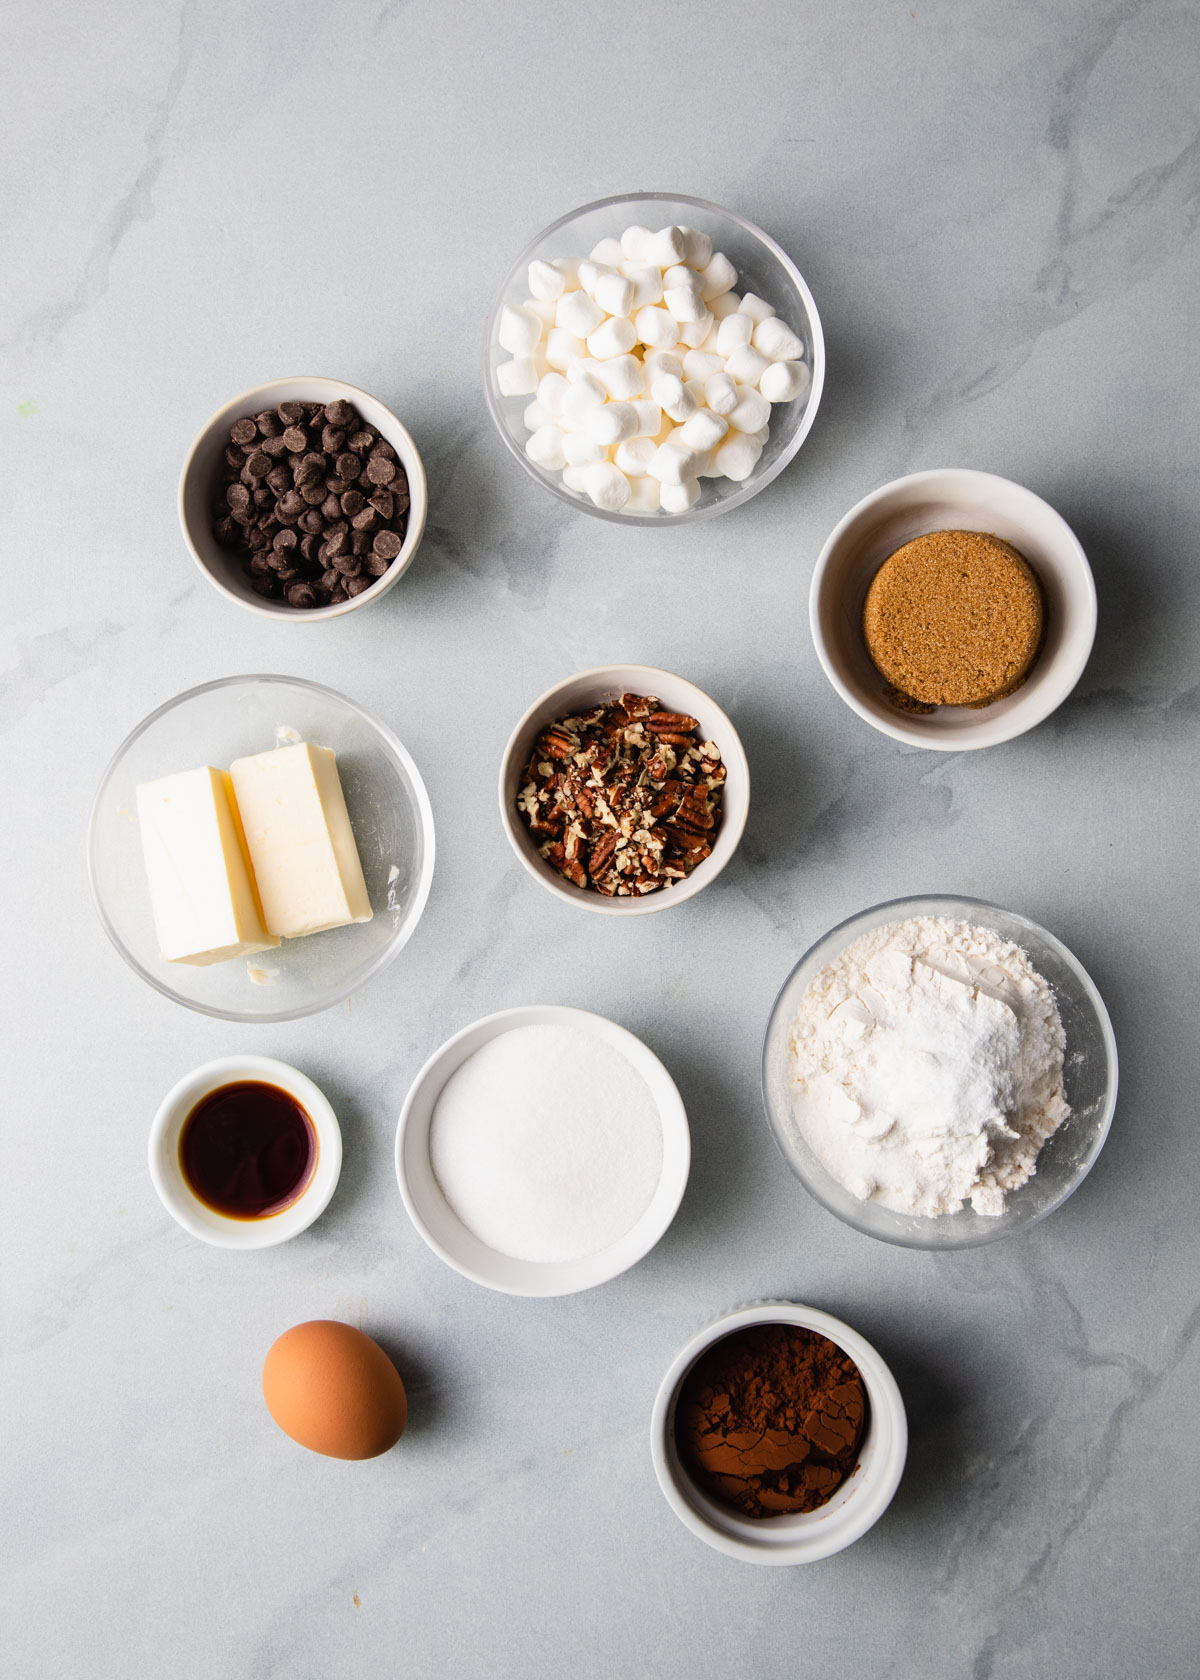 All of the ingredients needed to make rocky road cookies